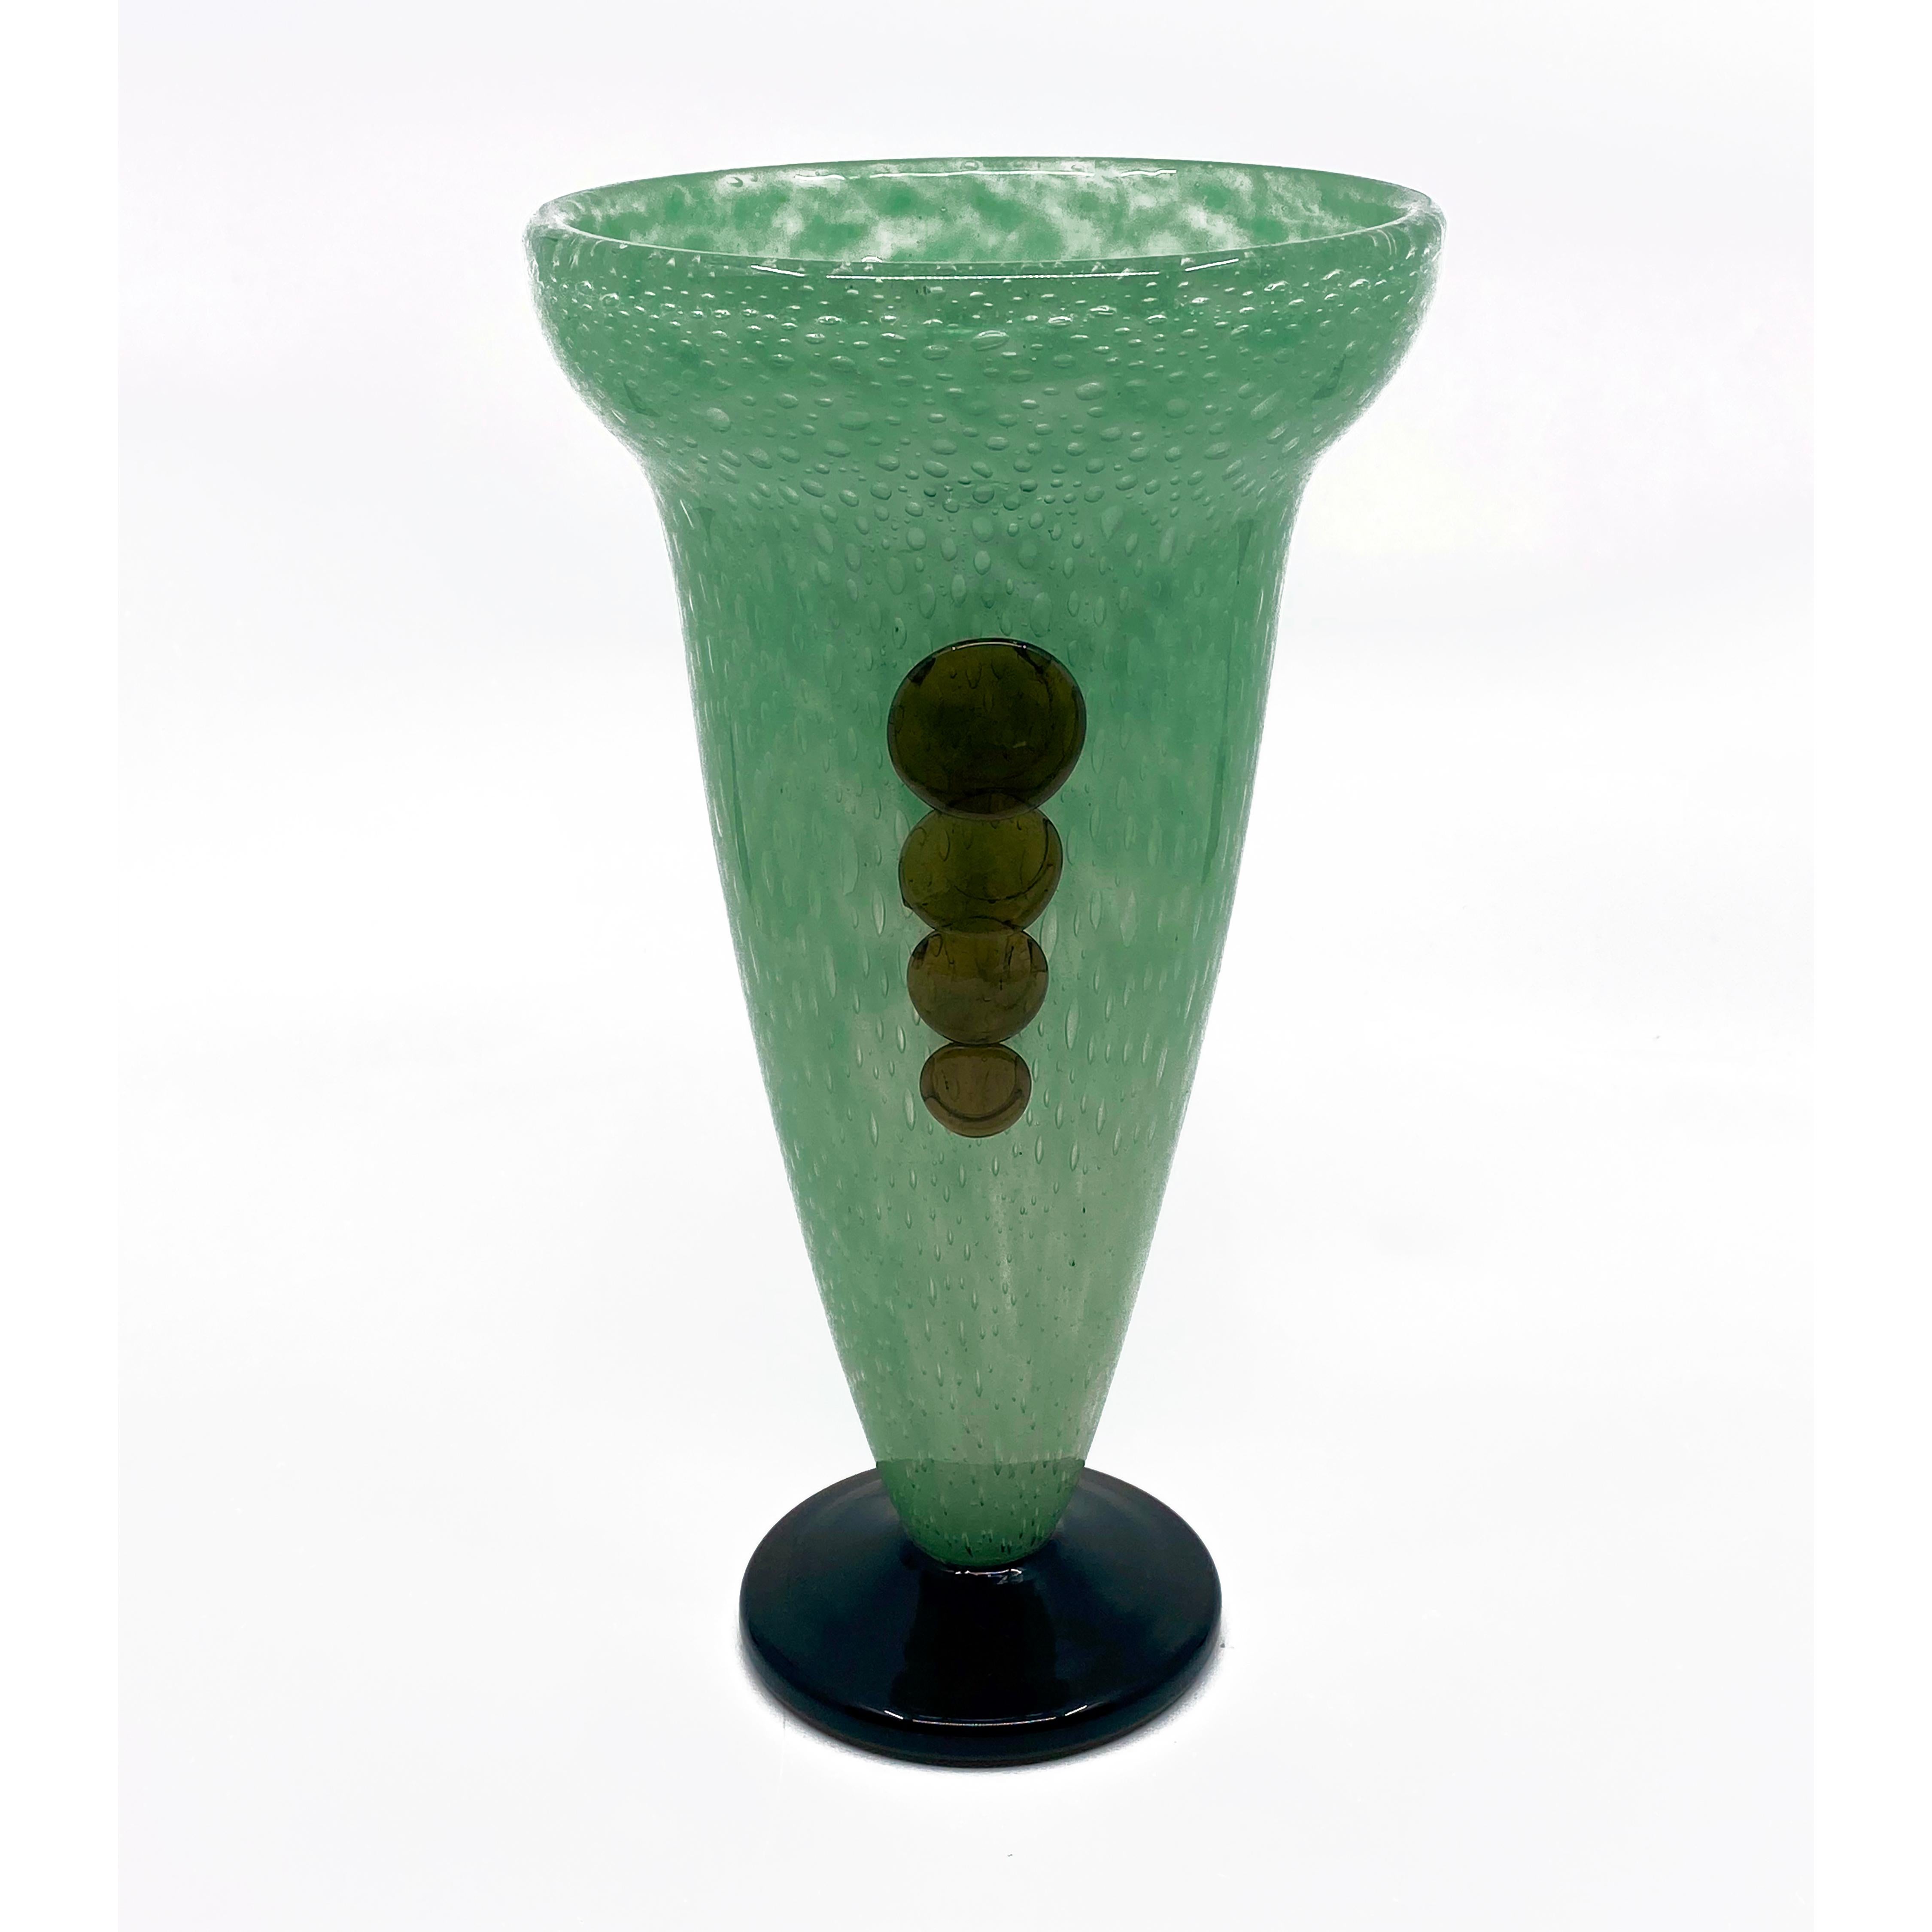 A green Jade Art Deco vase by Charles Schneider with applied glass dots along each side.
Made in France,
circa 1928
Signature: Schneider.